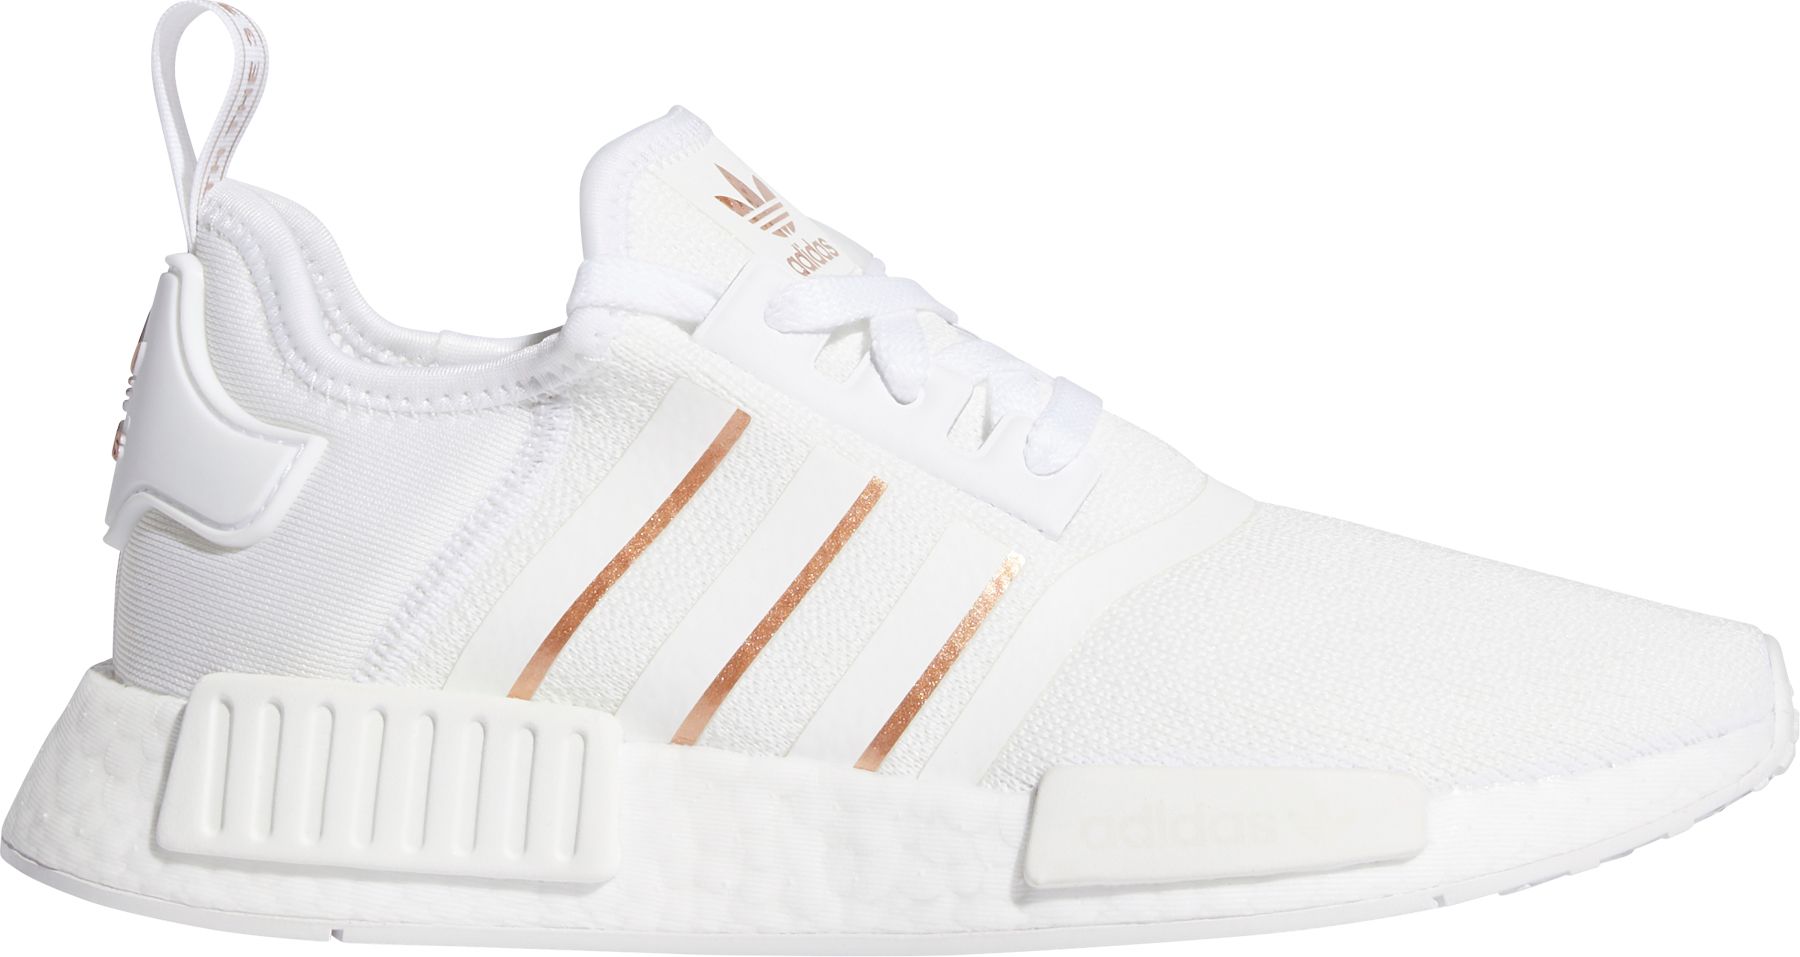 white and gold adidas shoes